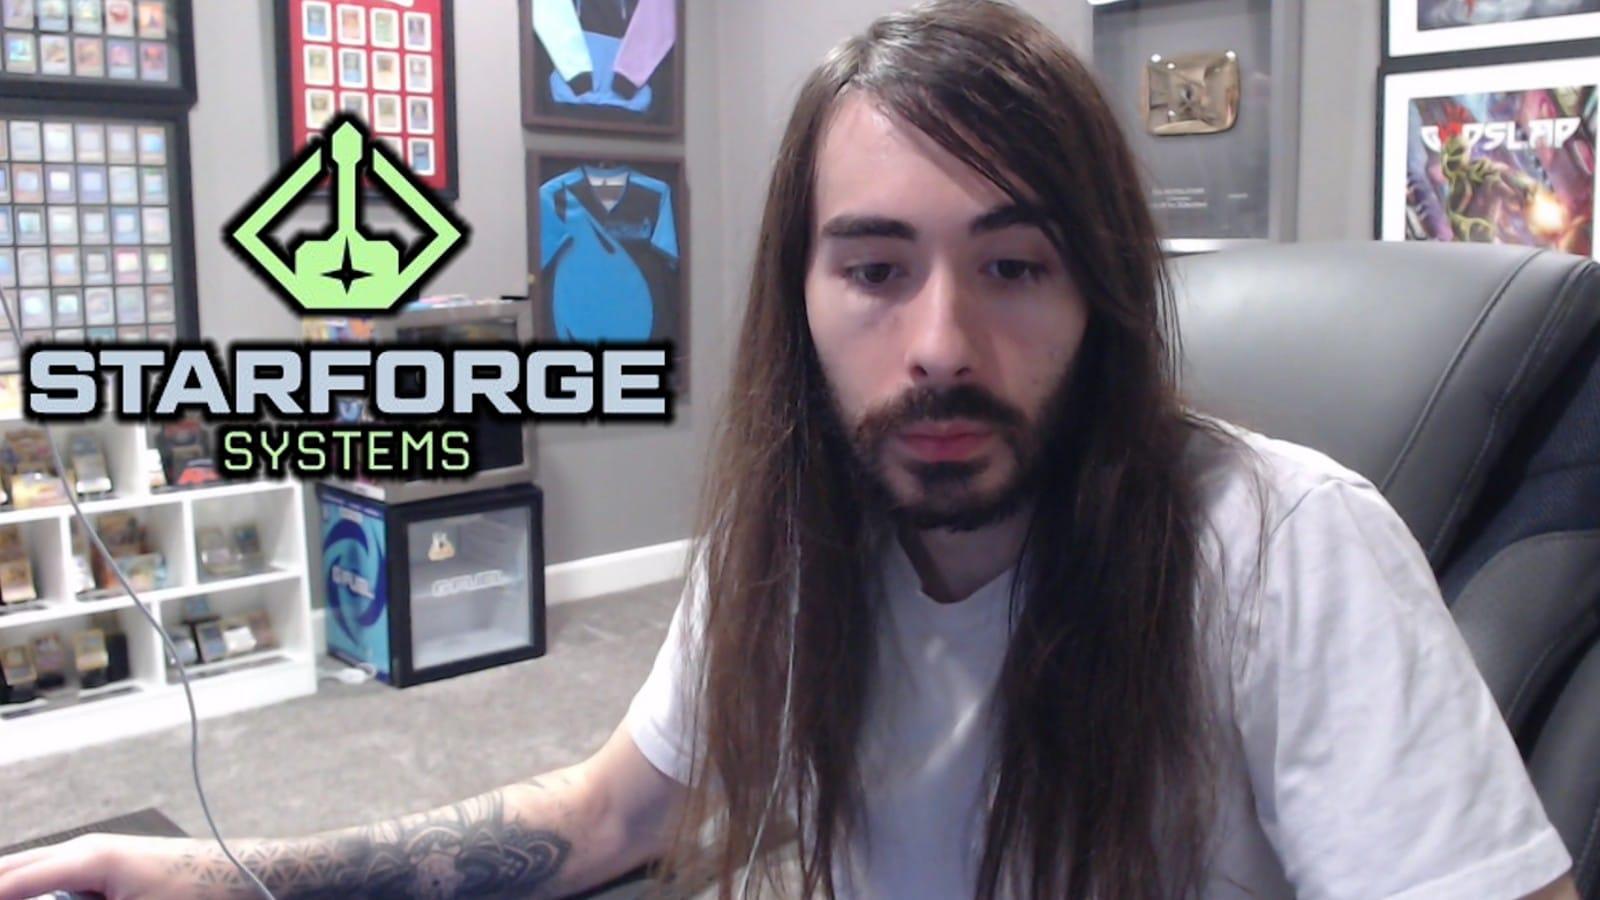 Moistcr1tiKal streaming on Twitch with Starforge Systems logo